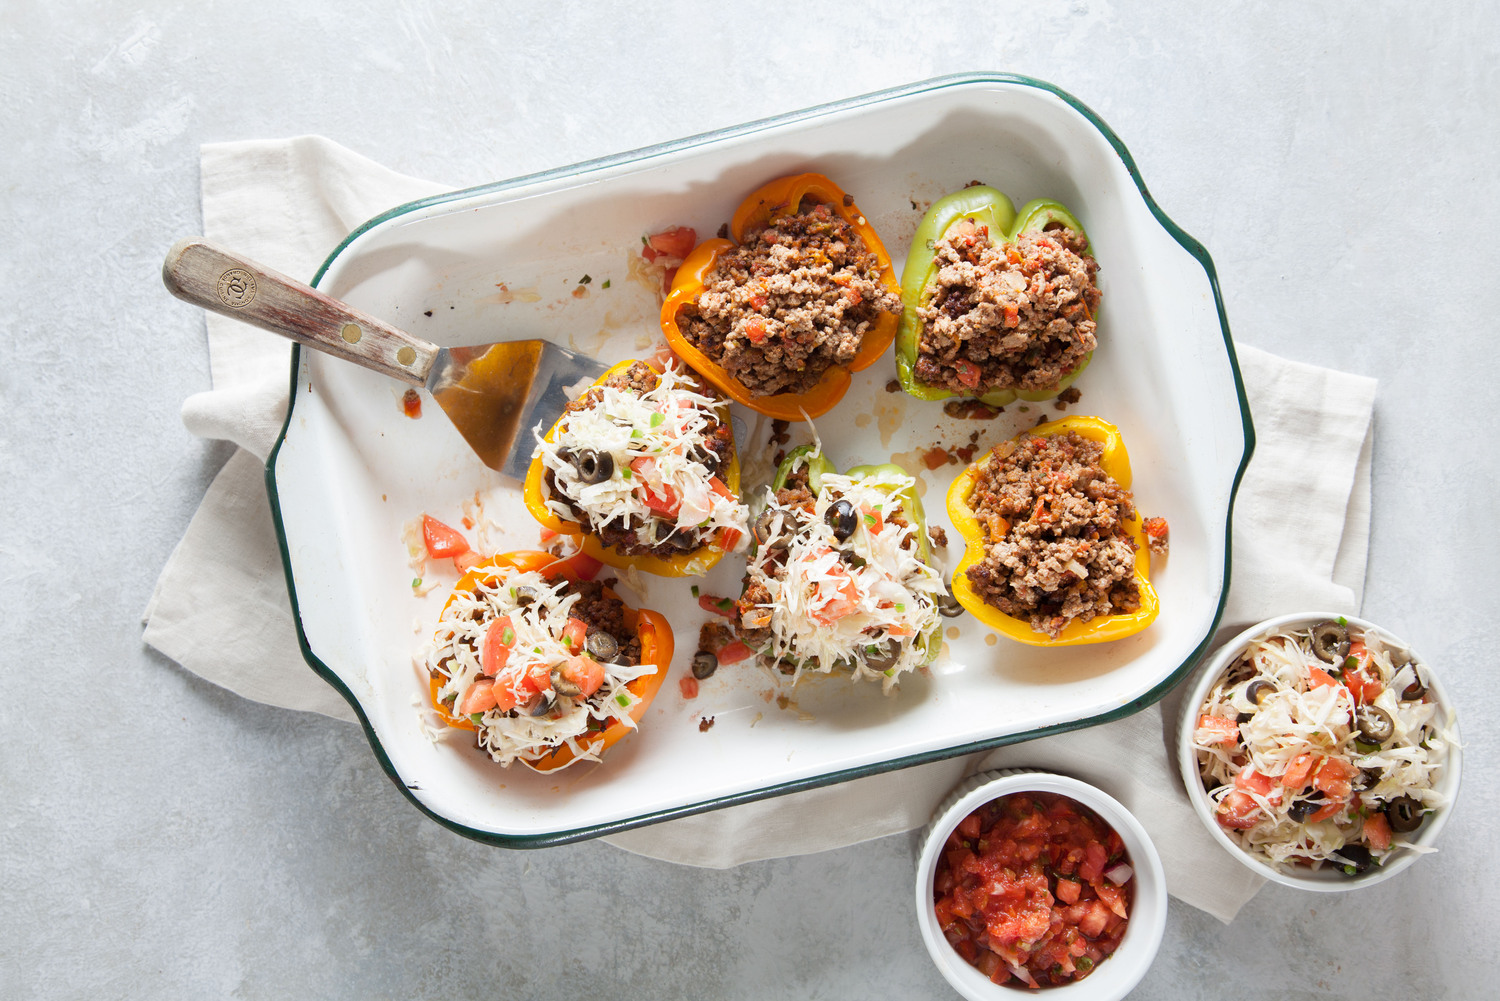 Taco-Stuffed Peppers and Spanish Coleslaw